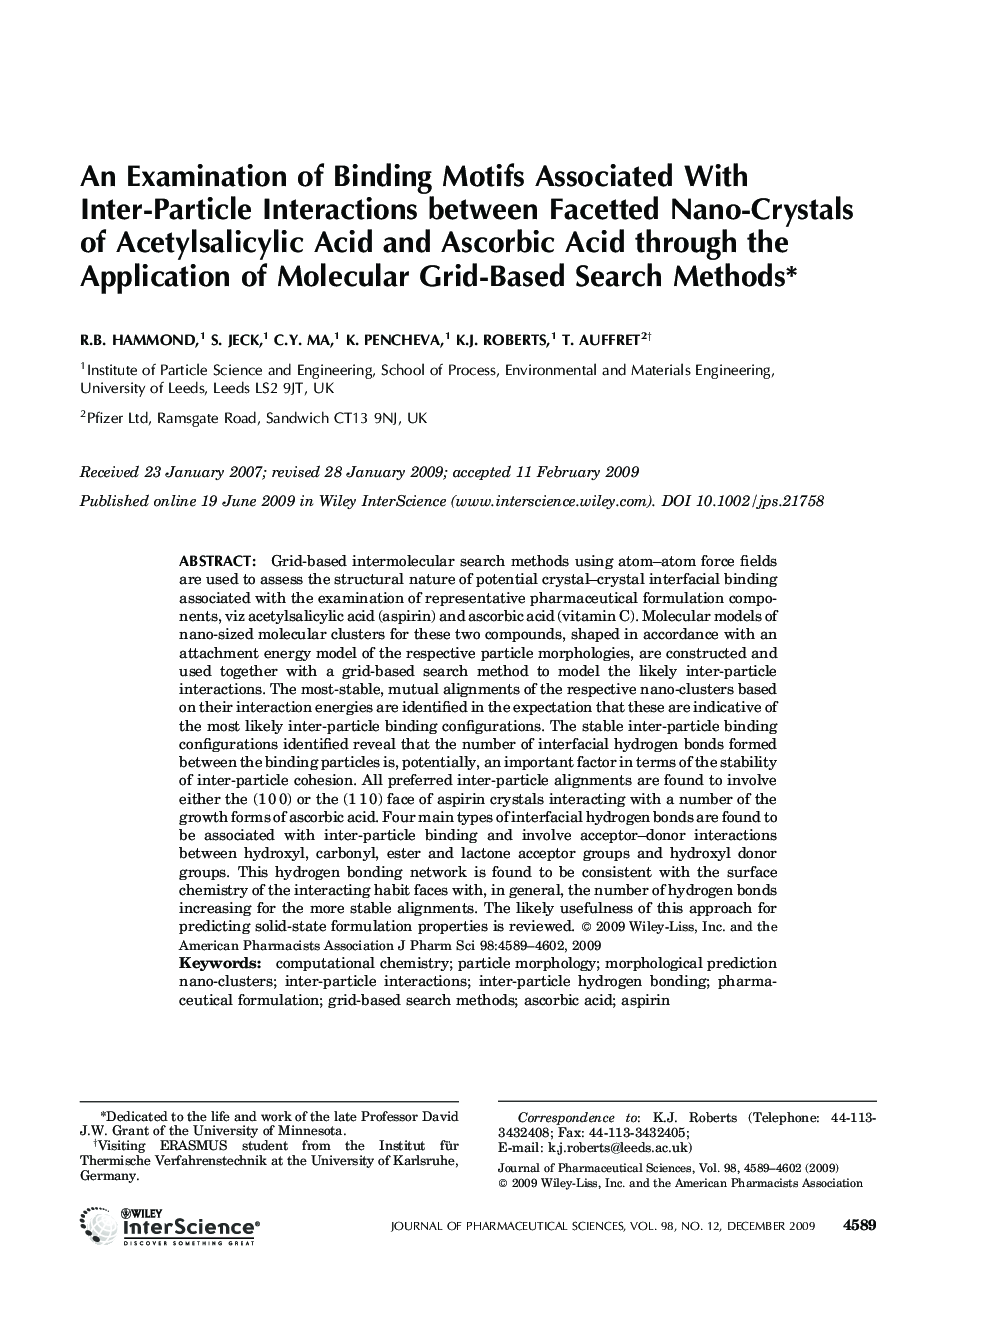 An examination of binding motifs associated with inter-particle interactions between facetted nano-crystals of acetylsalicylic acid and ascorbic acid through the application of molecular grid-based search methods